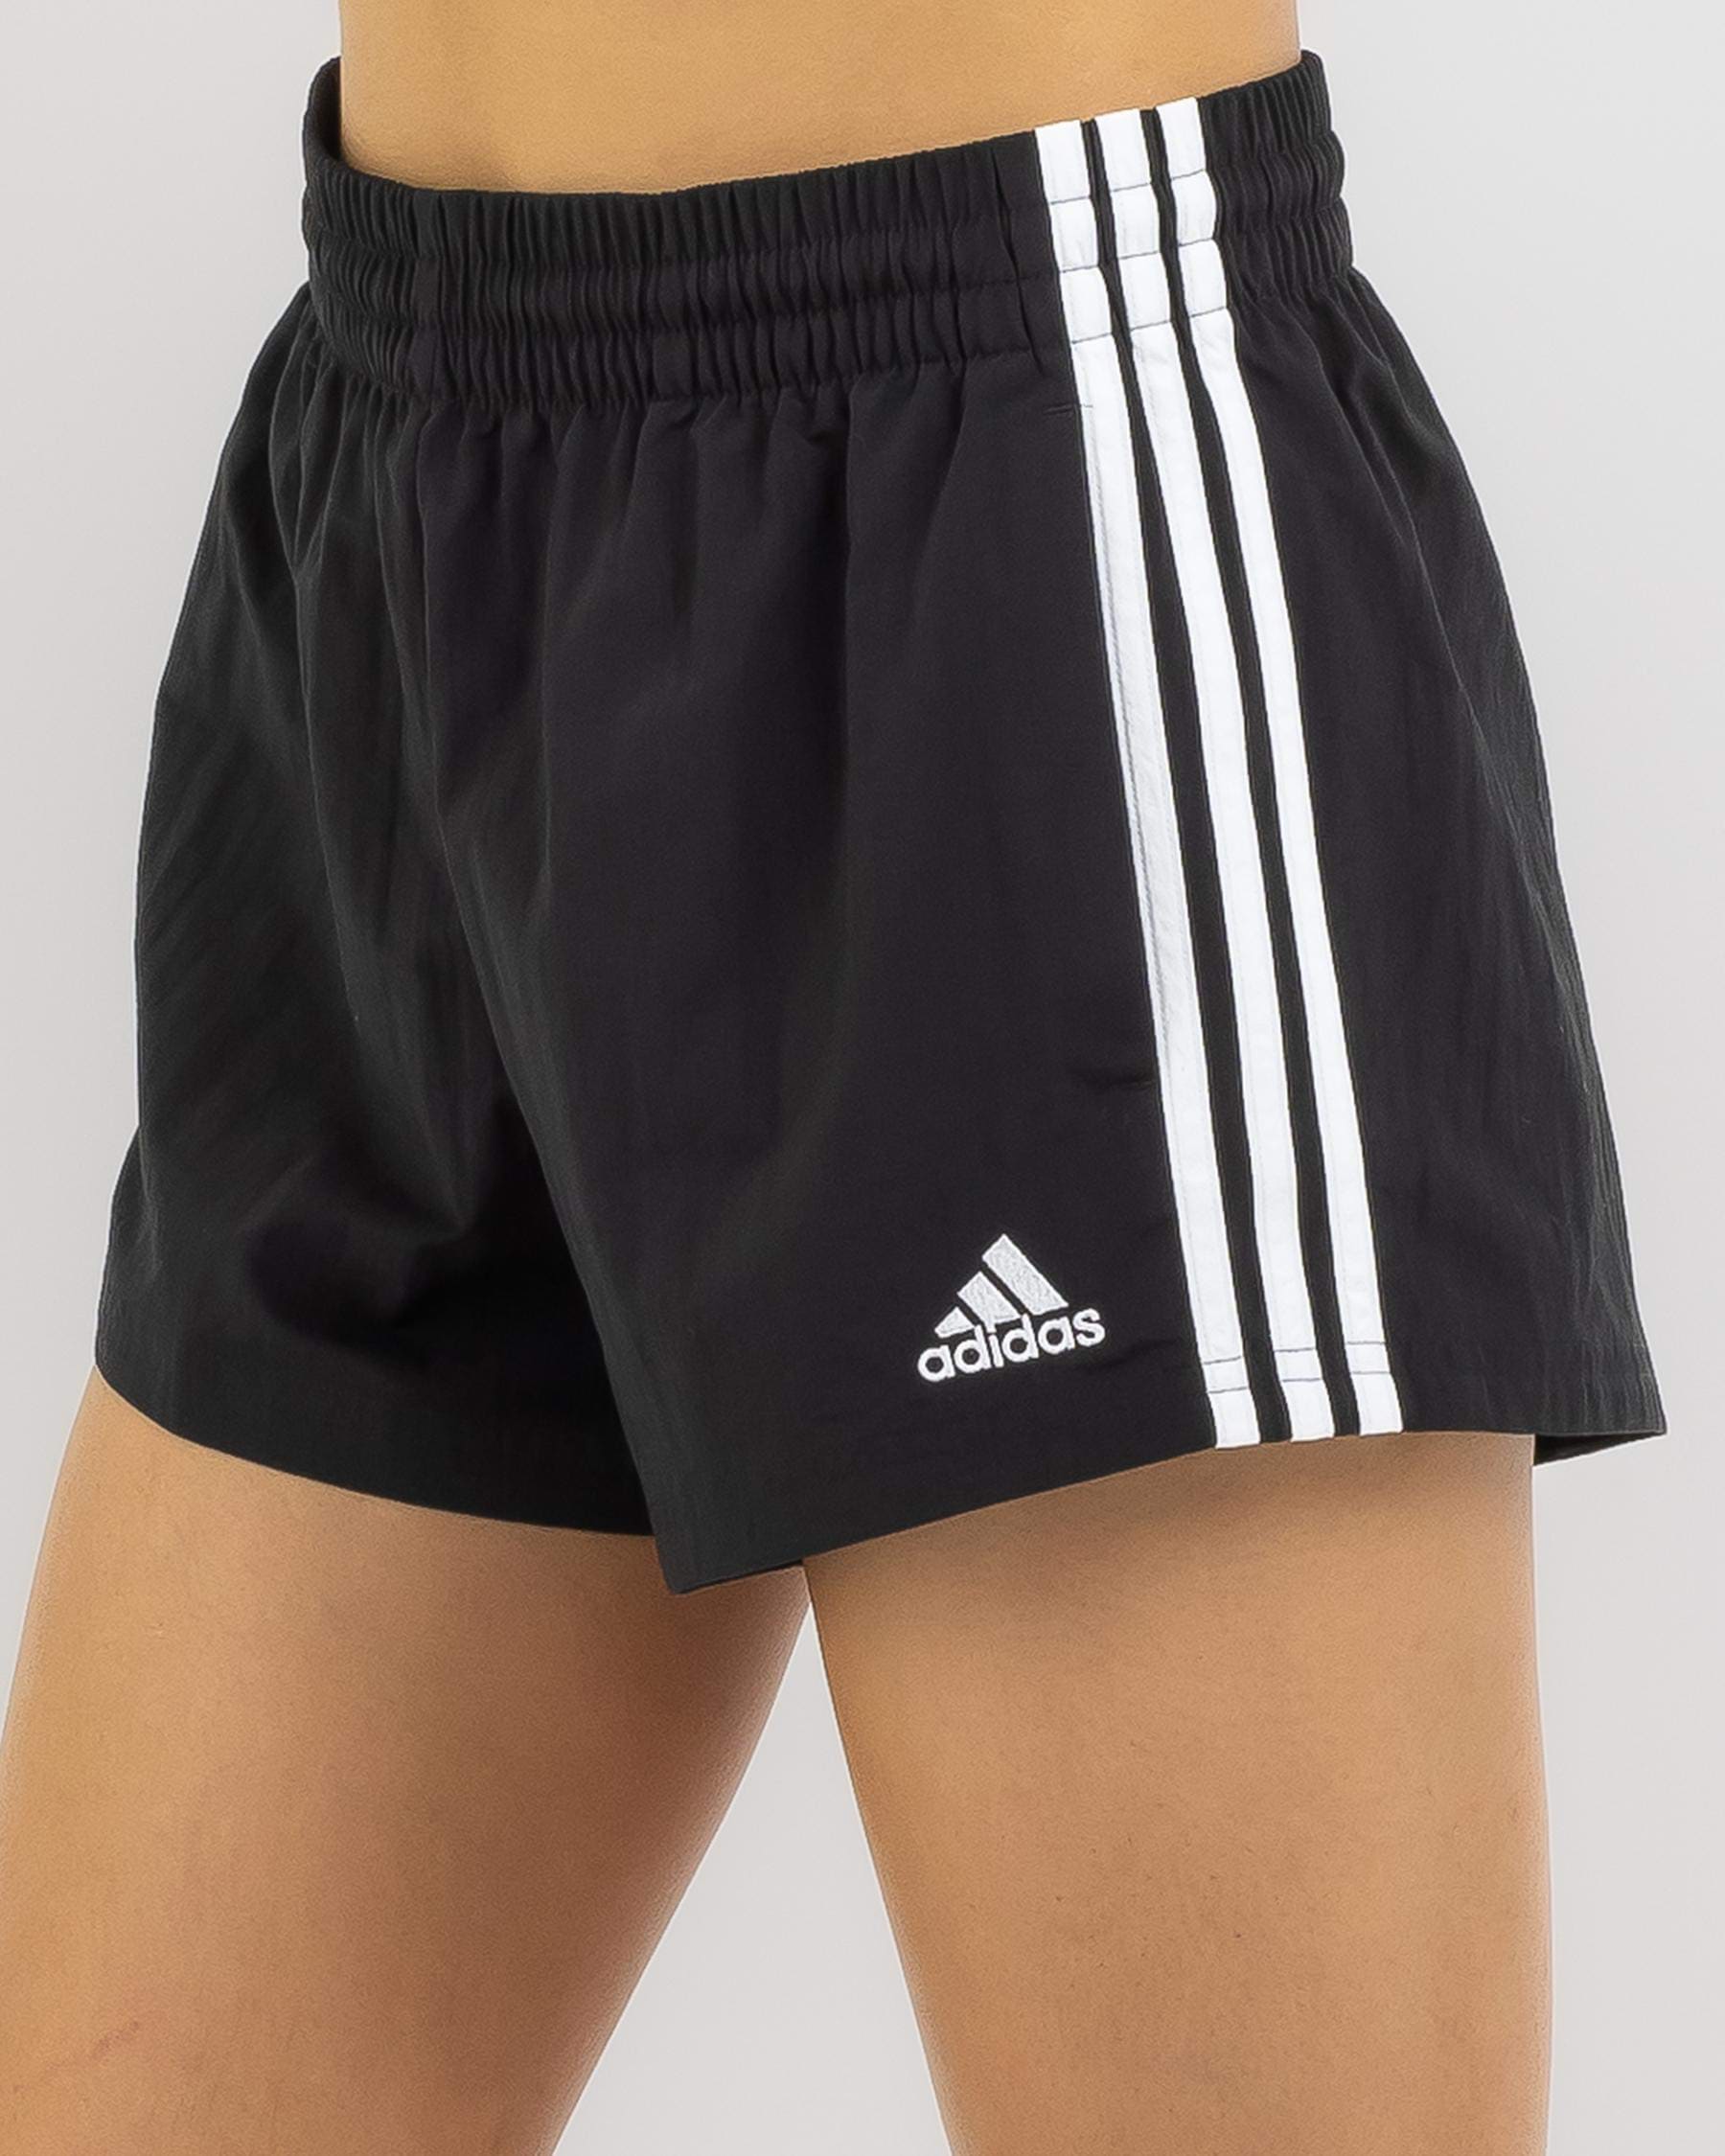 Adidas Essentials 3 States Stripe Easy Black/white & United Returns In FREE* Shipping Beach City - Woven Shorts 